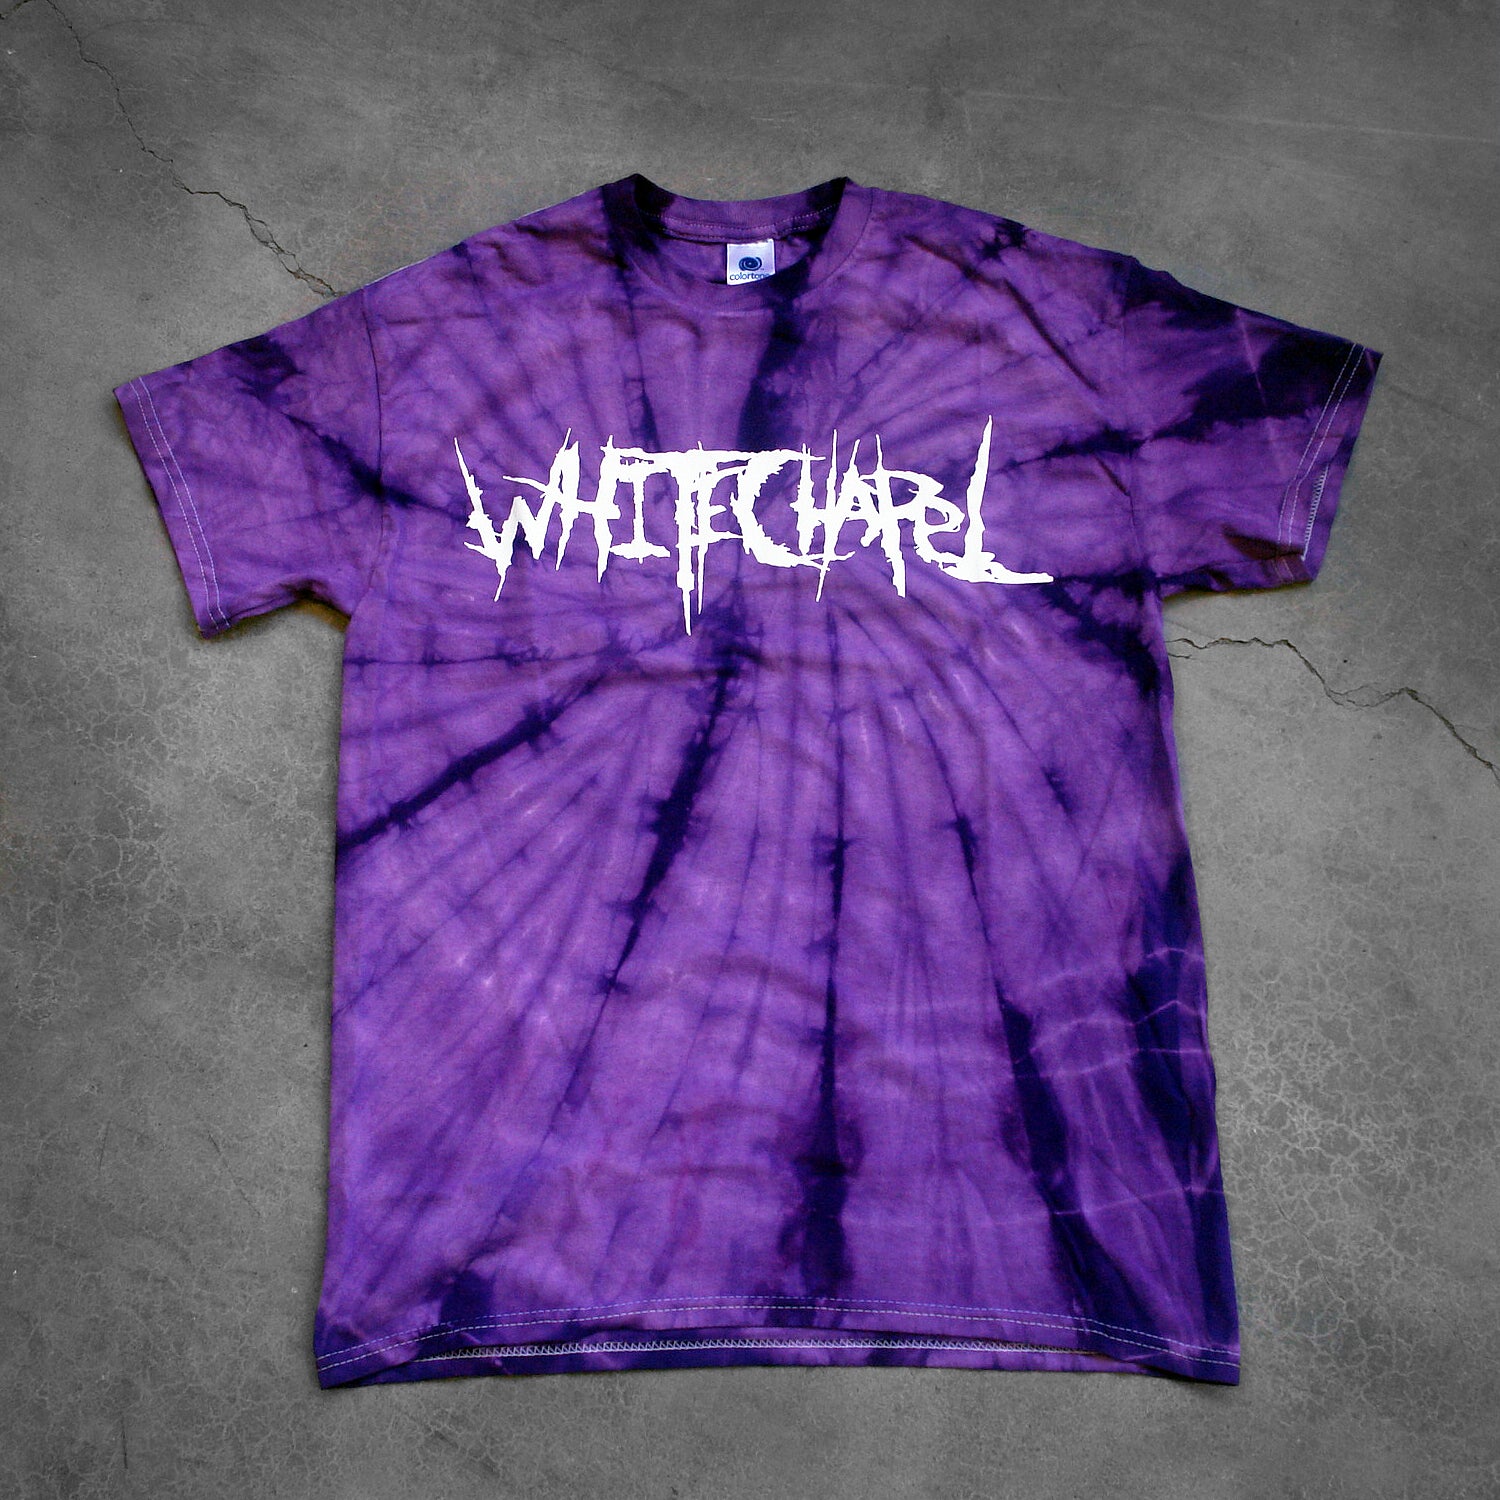 image of a purple spider tie dye tee shirt on a cracked concrete background. tee has front center chest print across in white that says Whitechapel